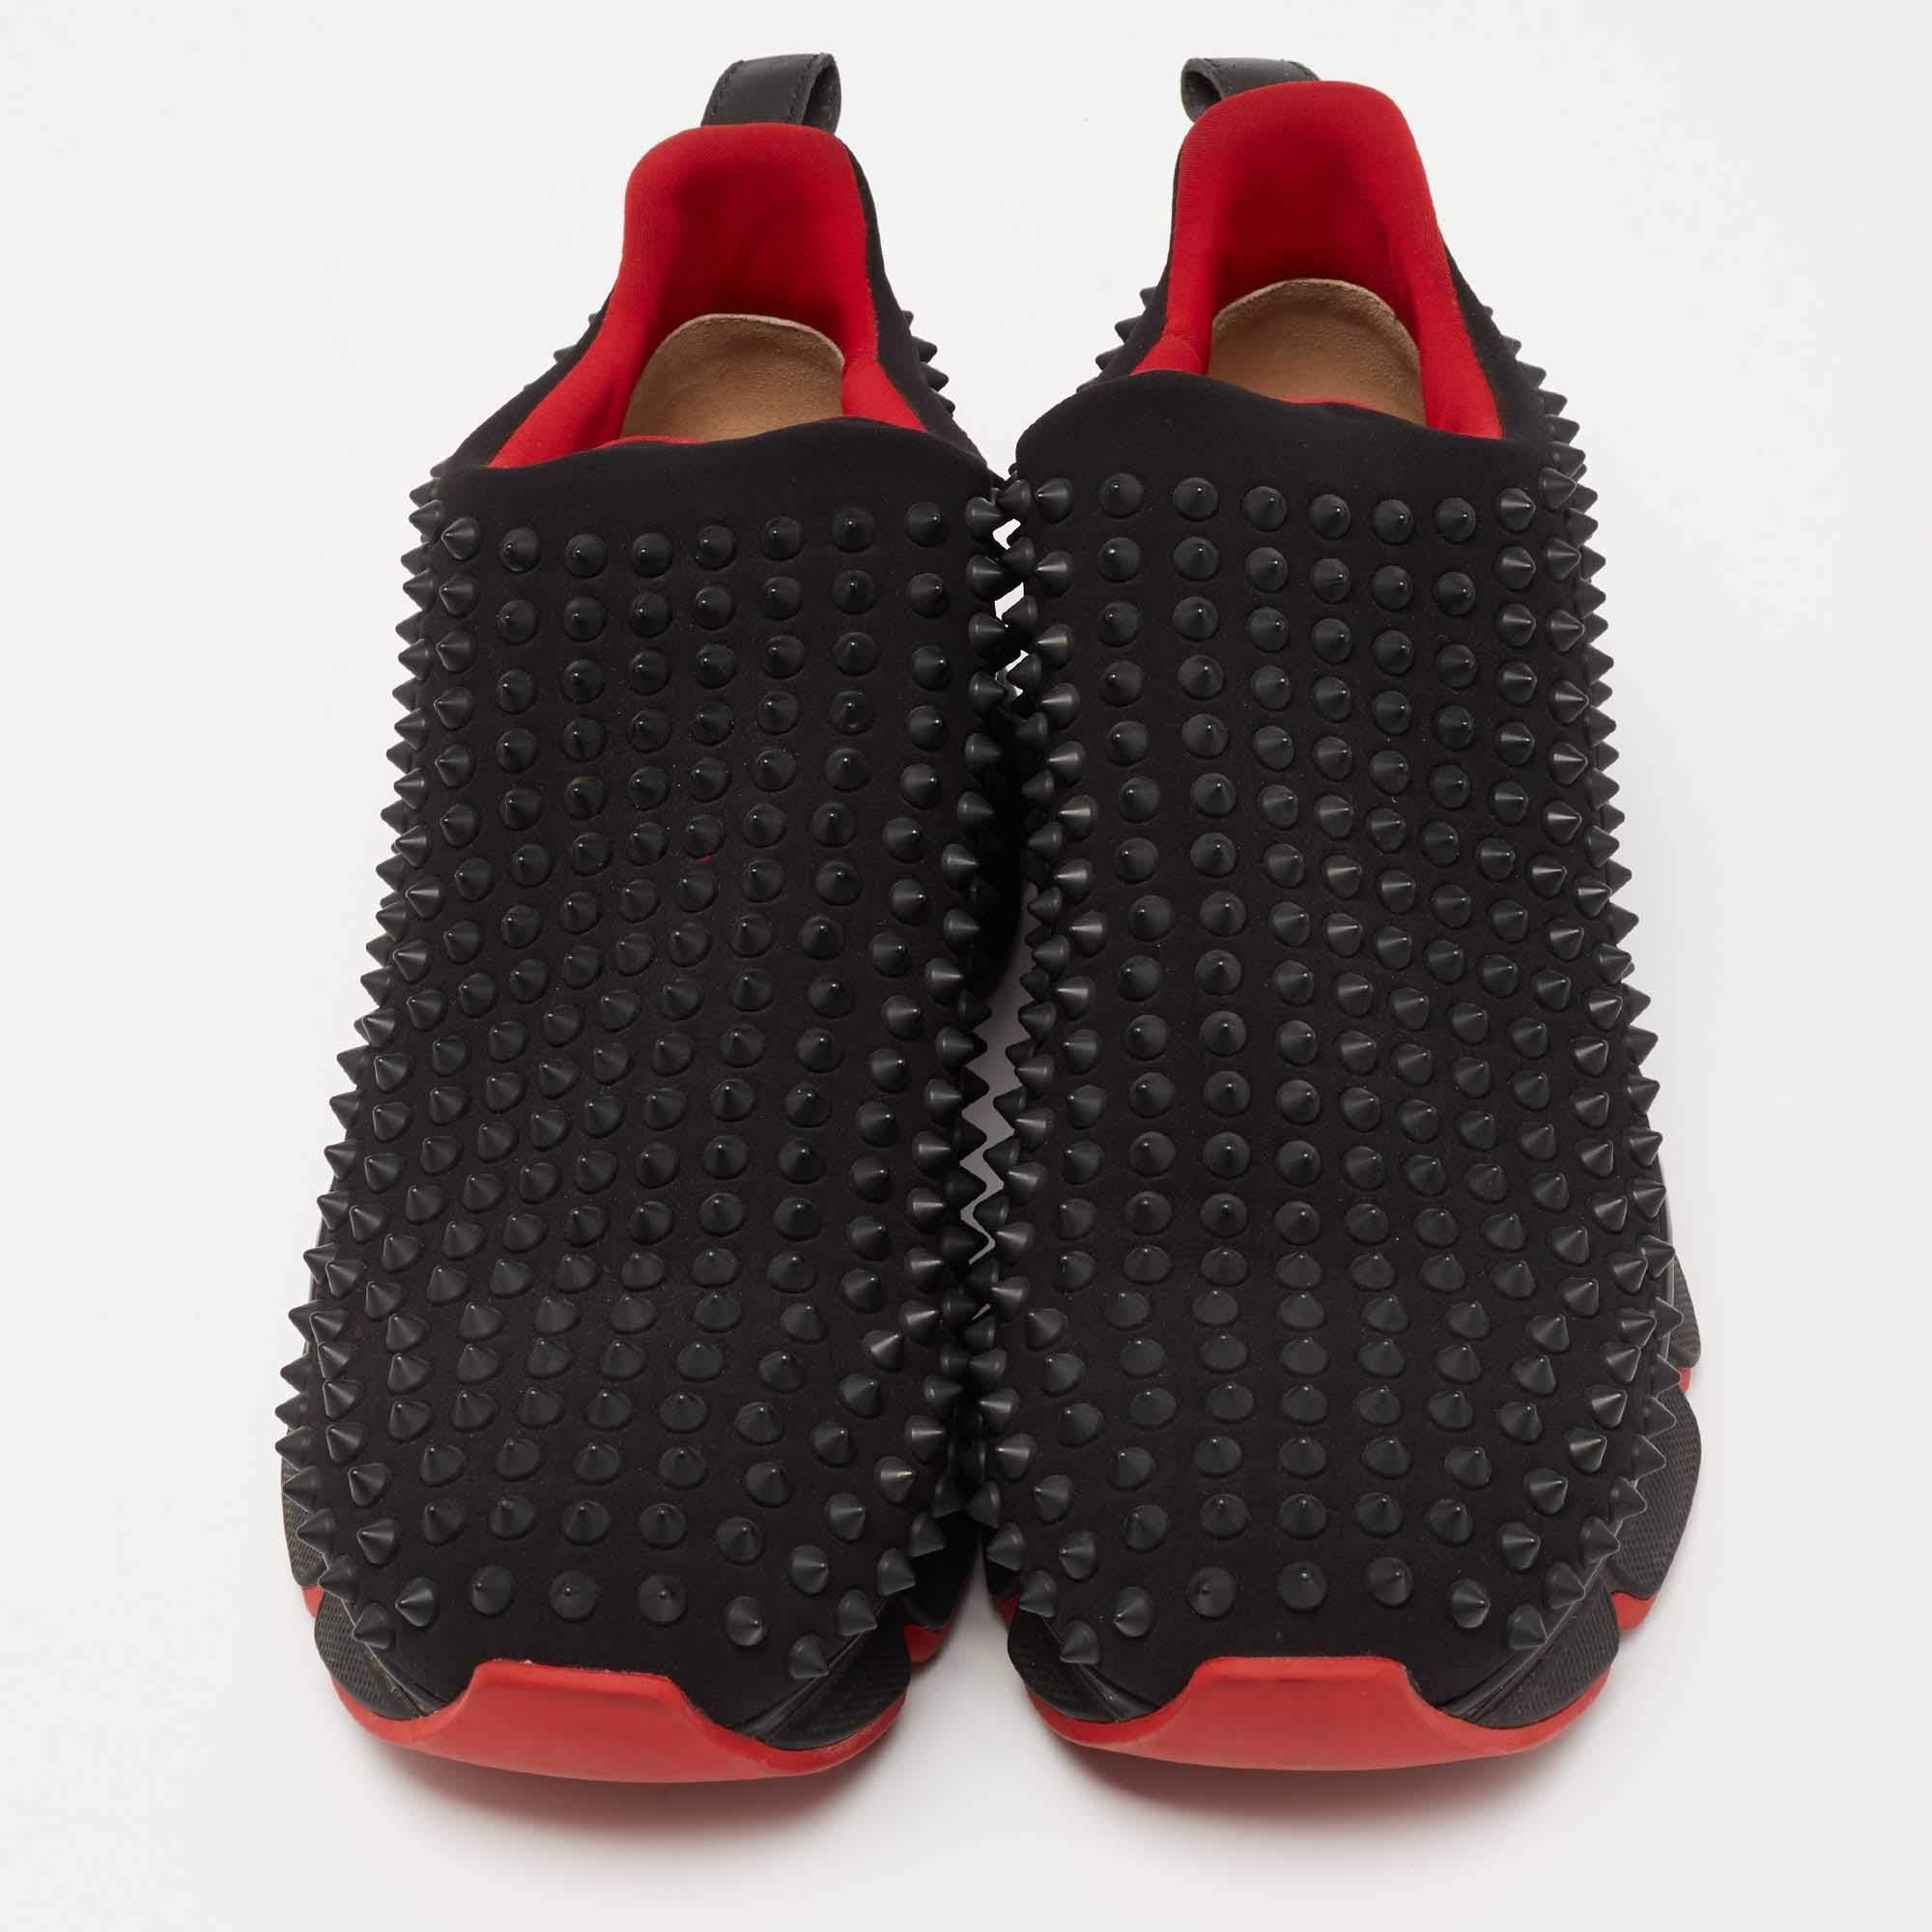 Sporty, luxe, and stylish, these Christian Louboutin sneakers are stunning to look at and will create a statement when paired with your street-style ensemble. They are made from fabric in a black shade and detailed with tonal spikes densely placed